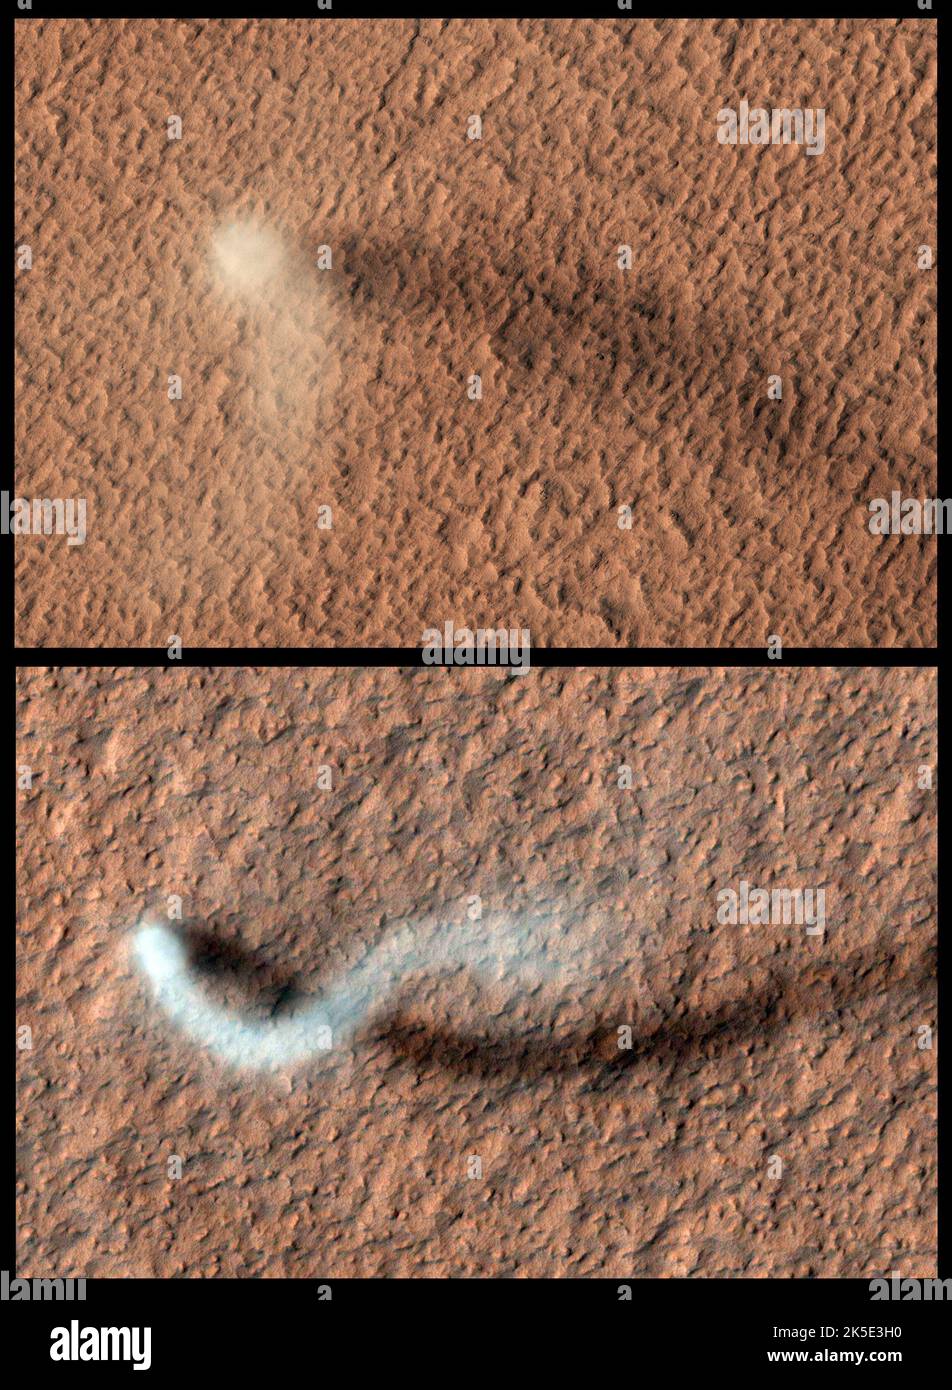 Dust devils on Mars. Dust devils are rotating columns of dust that form around low-pressure air pockets, and are common on both Earth & Mars. These dust devils formed on the dust-covered, volcanic plains of Amazonis Planitia. The dust devil (top) has a core roughly 50m across. The length of the shadow suggests the plume of rises about 650m into the atmosphere. The (lower image) dust devil is serpentine in shape, and its shadow indicates that the dust plume reaches more than 800m, or half a mile in height. An optimised & enhanced version of NASA imagery. Credit: NASA/JPL/UArizona Stock Photo